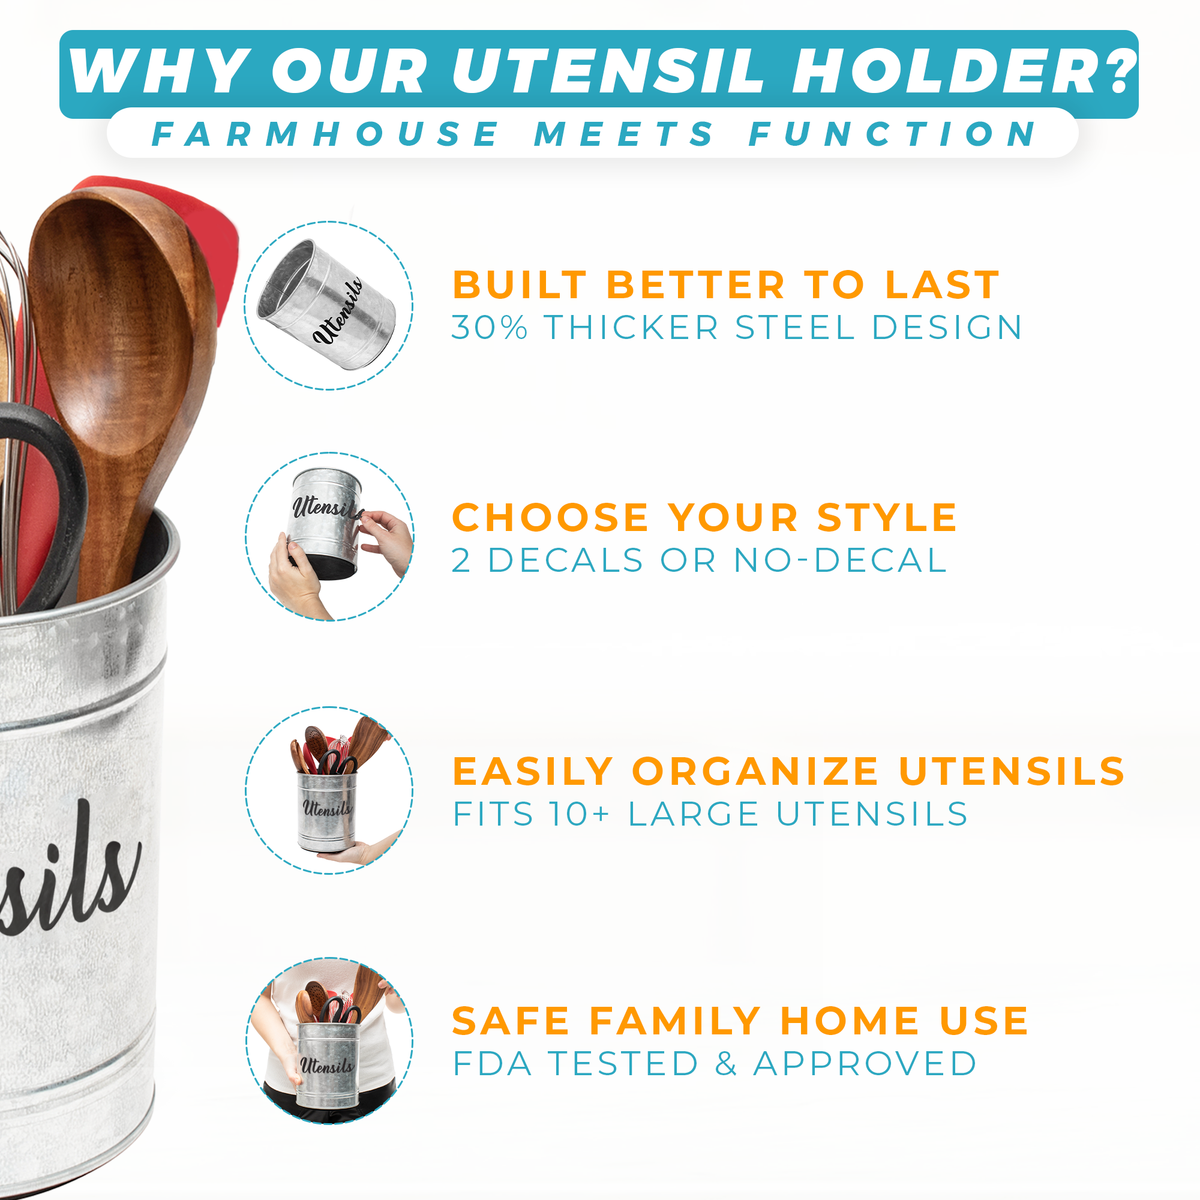 Utensil holder with features that meets function